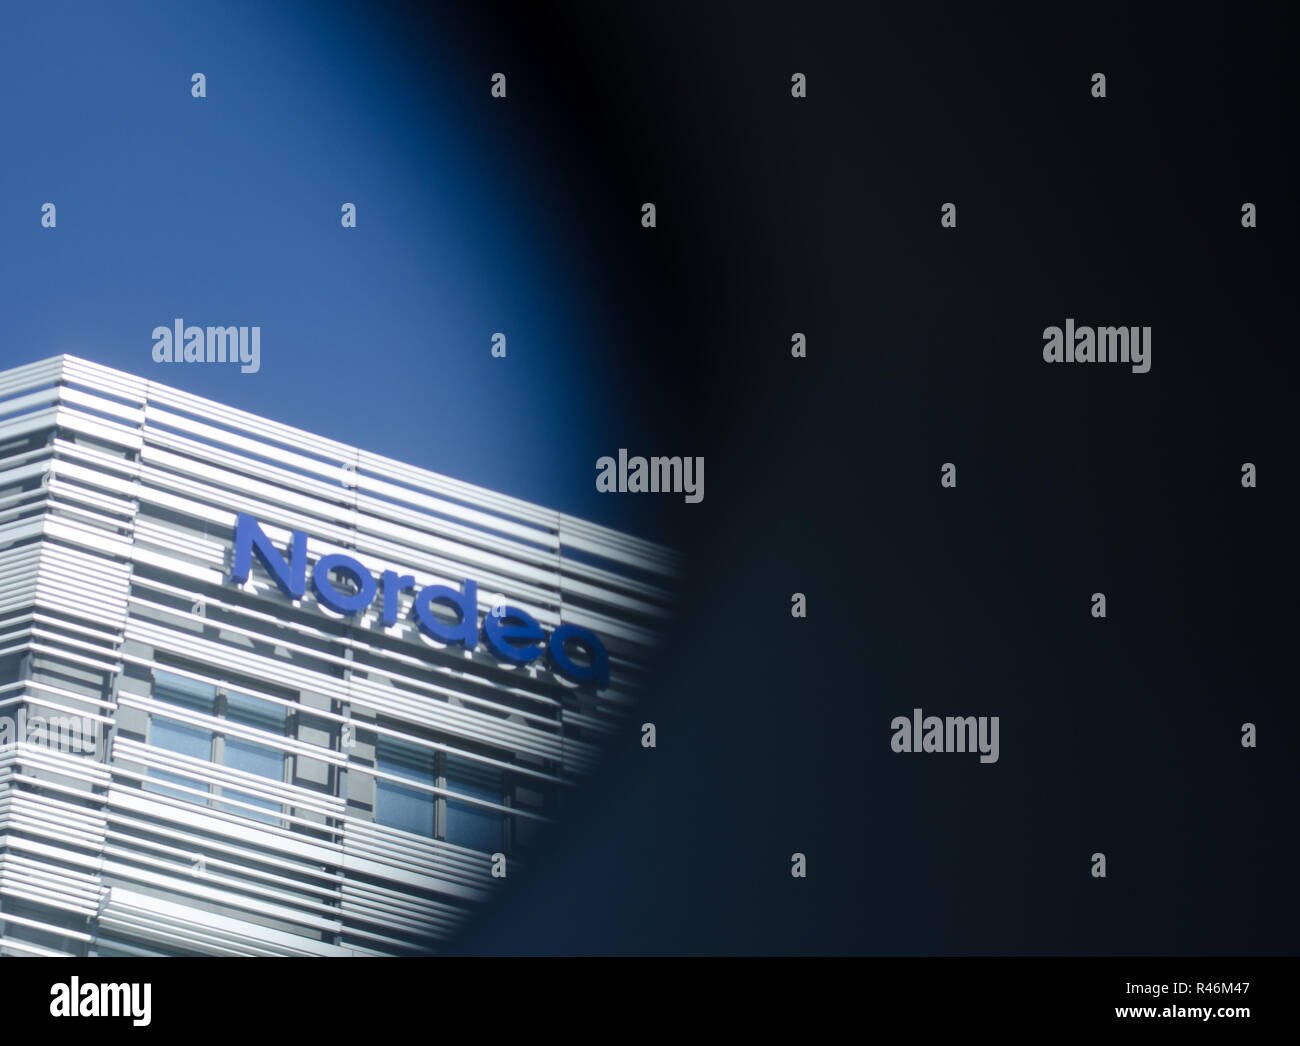 Stockholm, Sverige - 5 may 2018. The logo of the mainly nordic bank Nordea on the exterior of a building along the motorway E4 in Stockholm Stock Photo